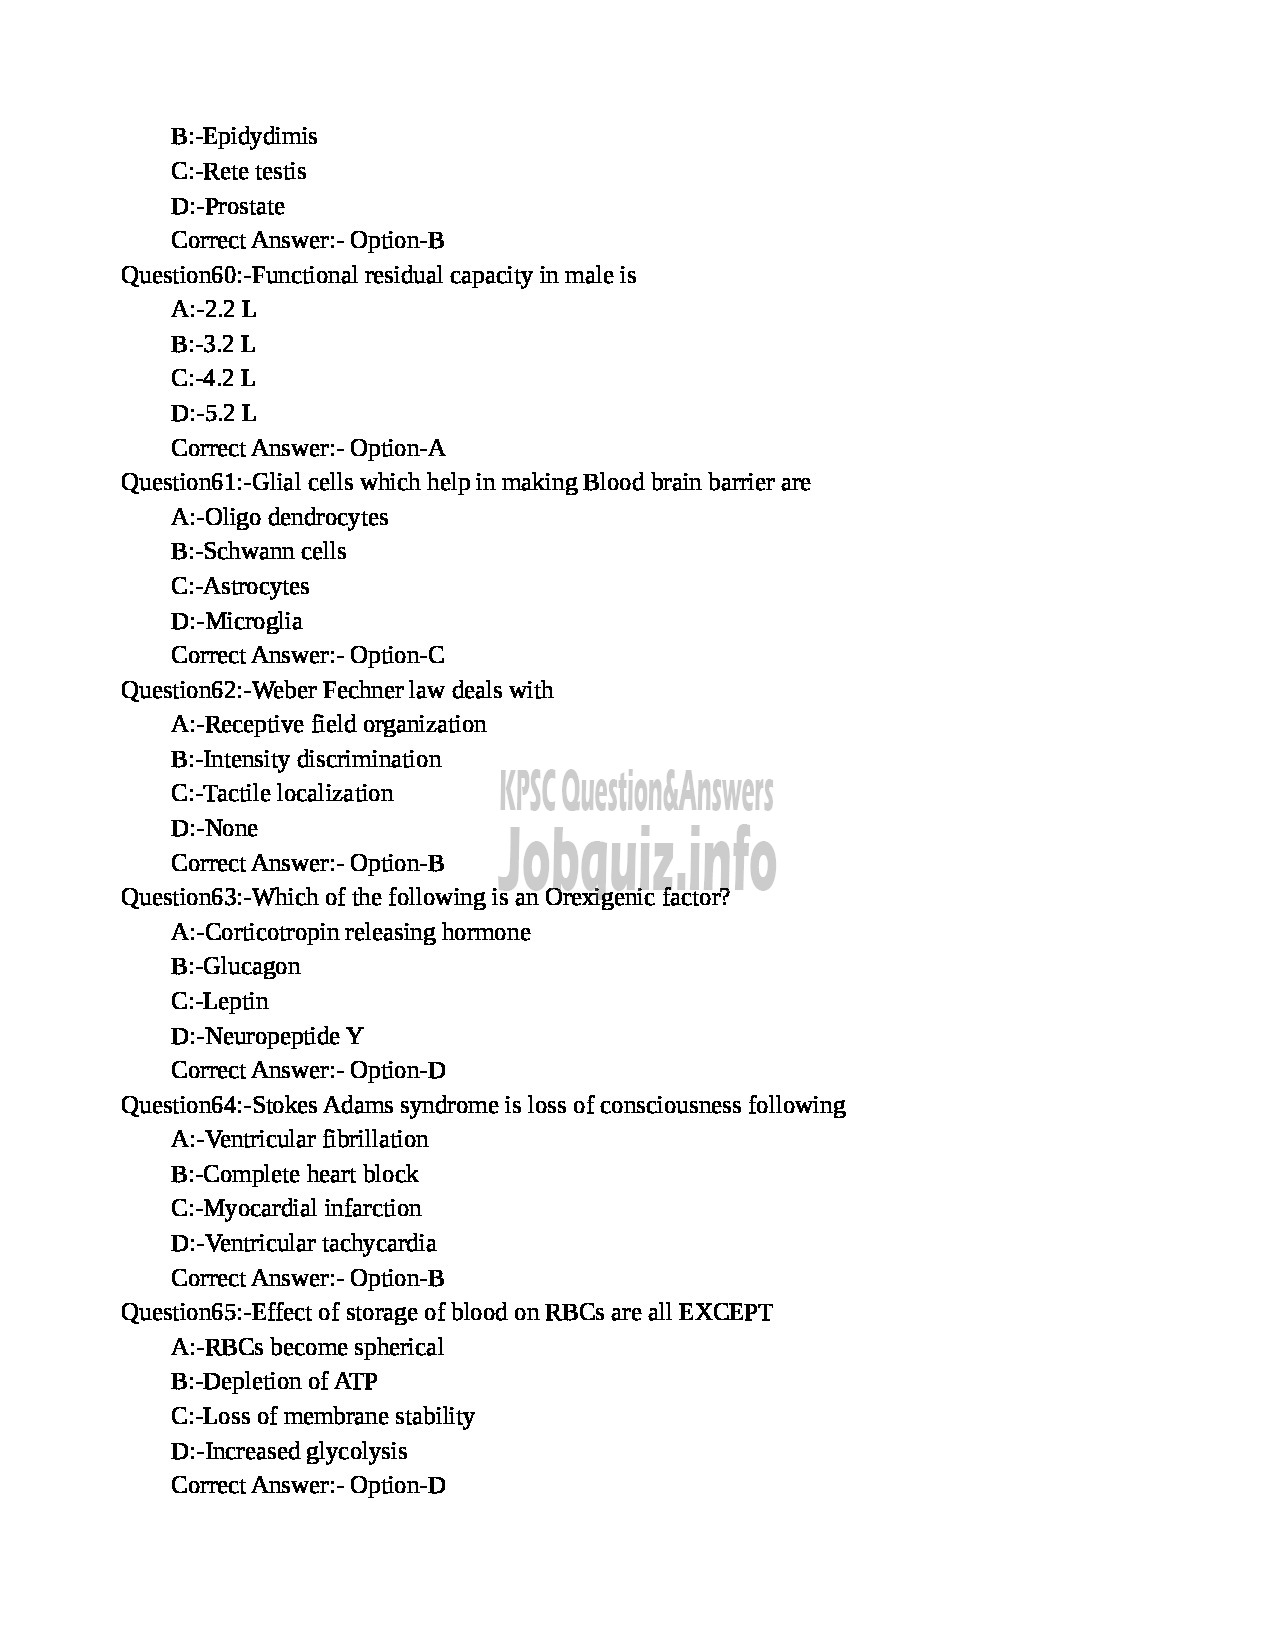 Kerala PSC Question Paper - Assistant Professor in physiology Medical Education-10